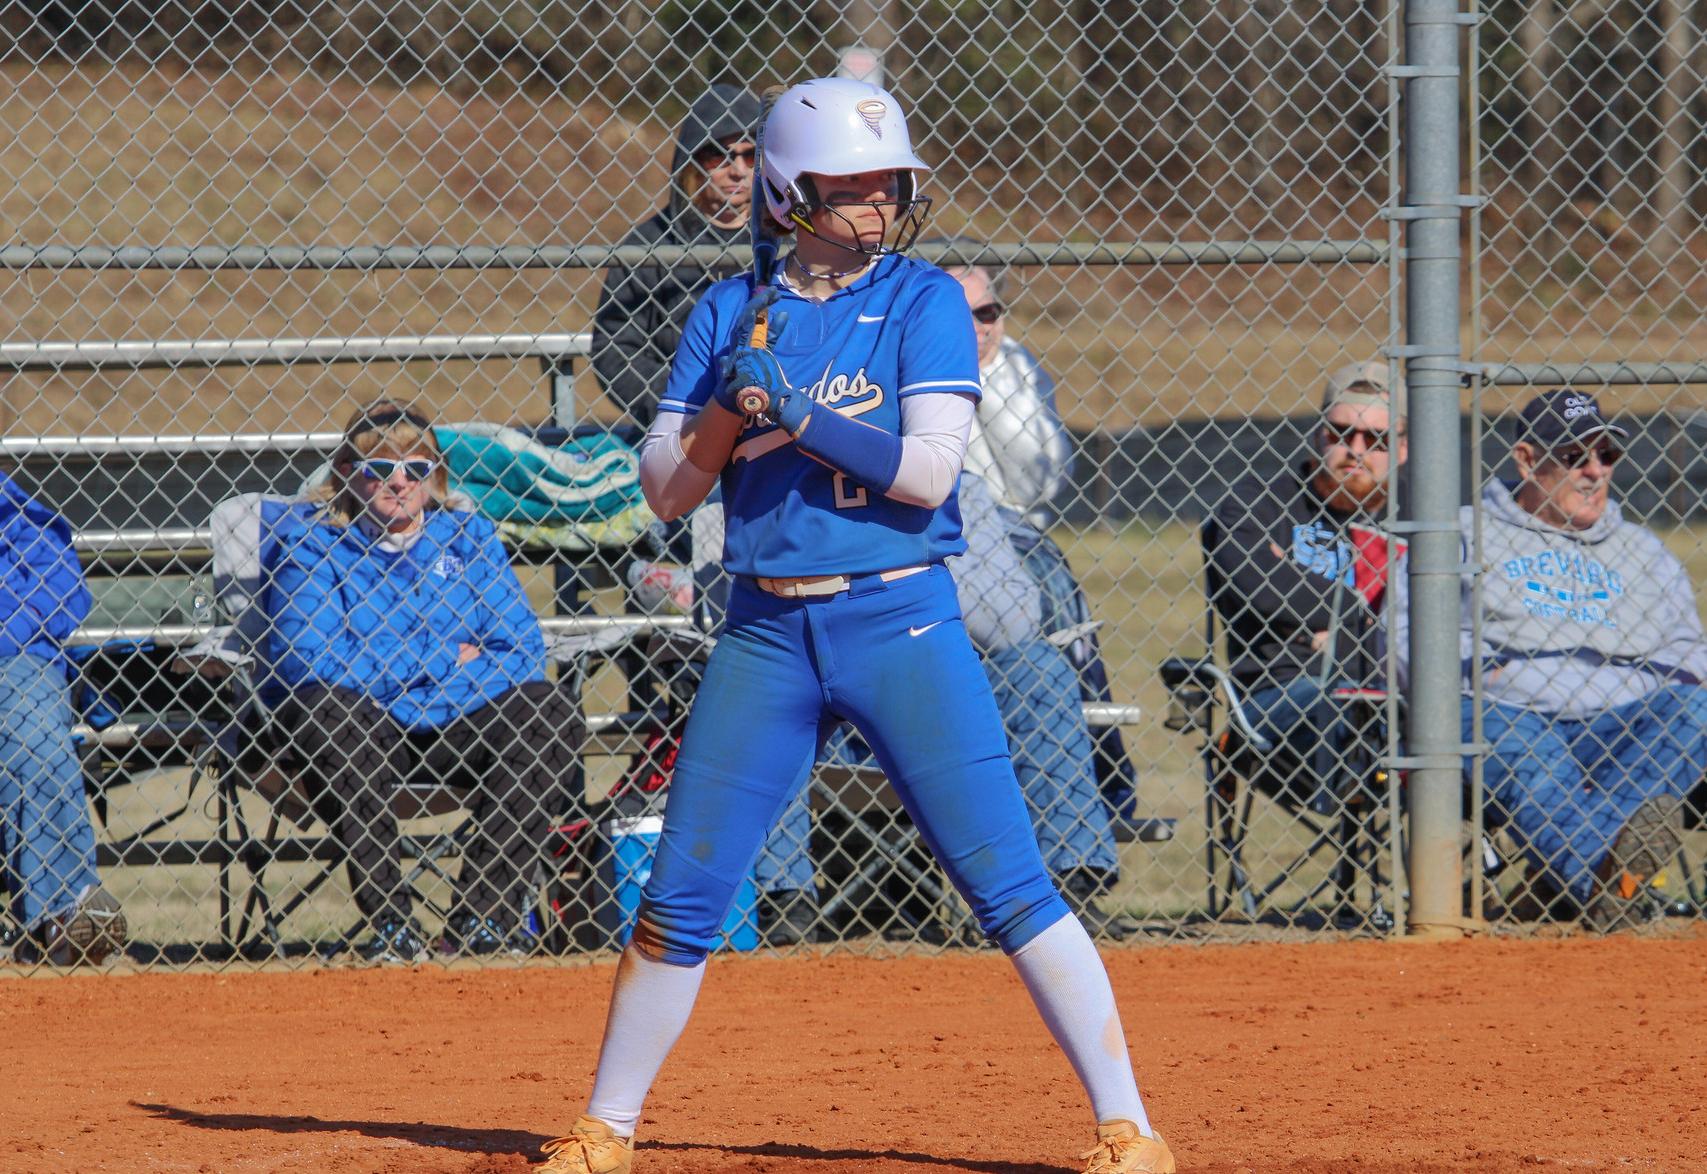 Savannah Jones' RBI double in the bottom of the eighth gave Brevard the win in game one (Photo courtesy of Damon Hewitt '23)